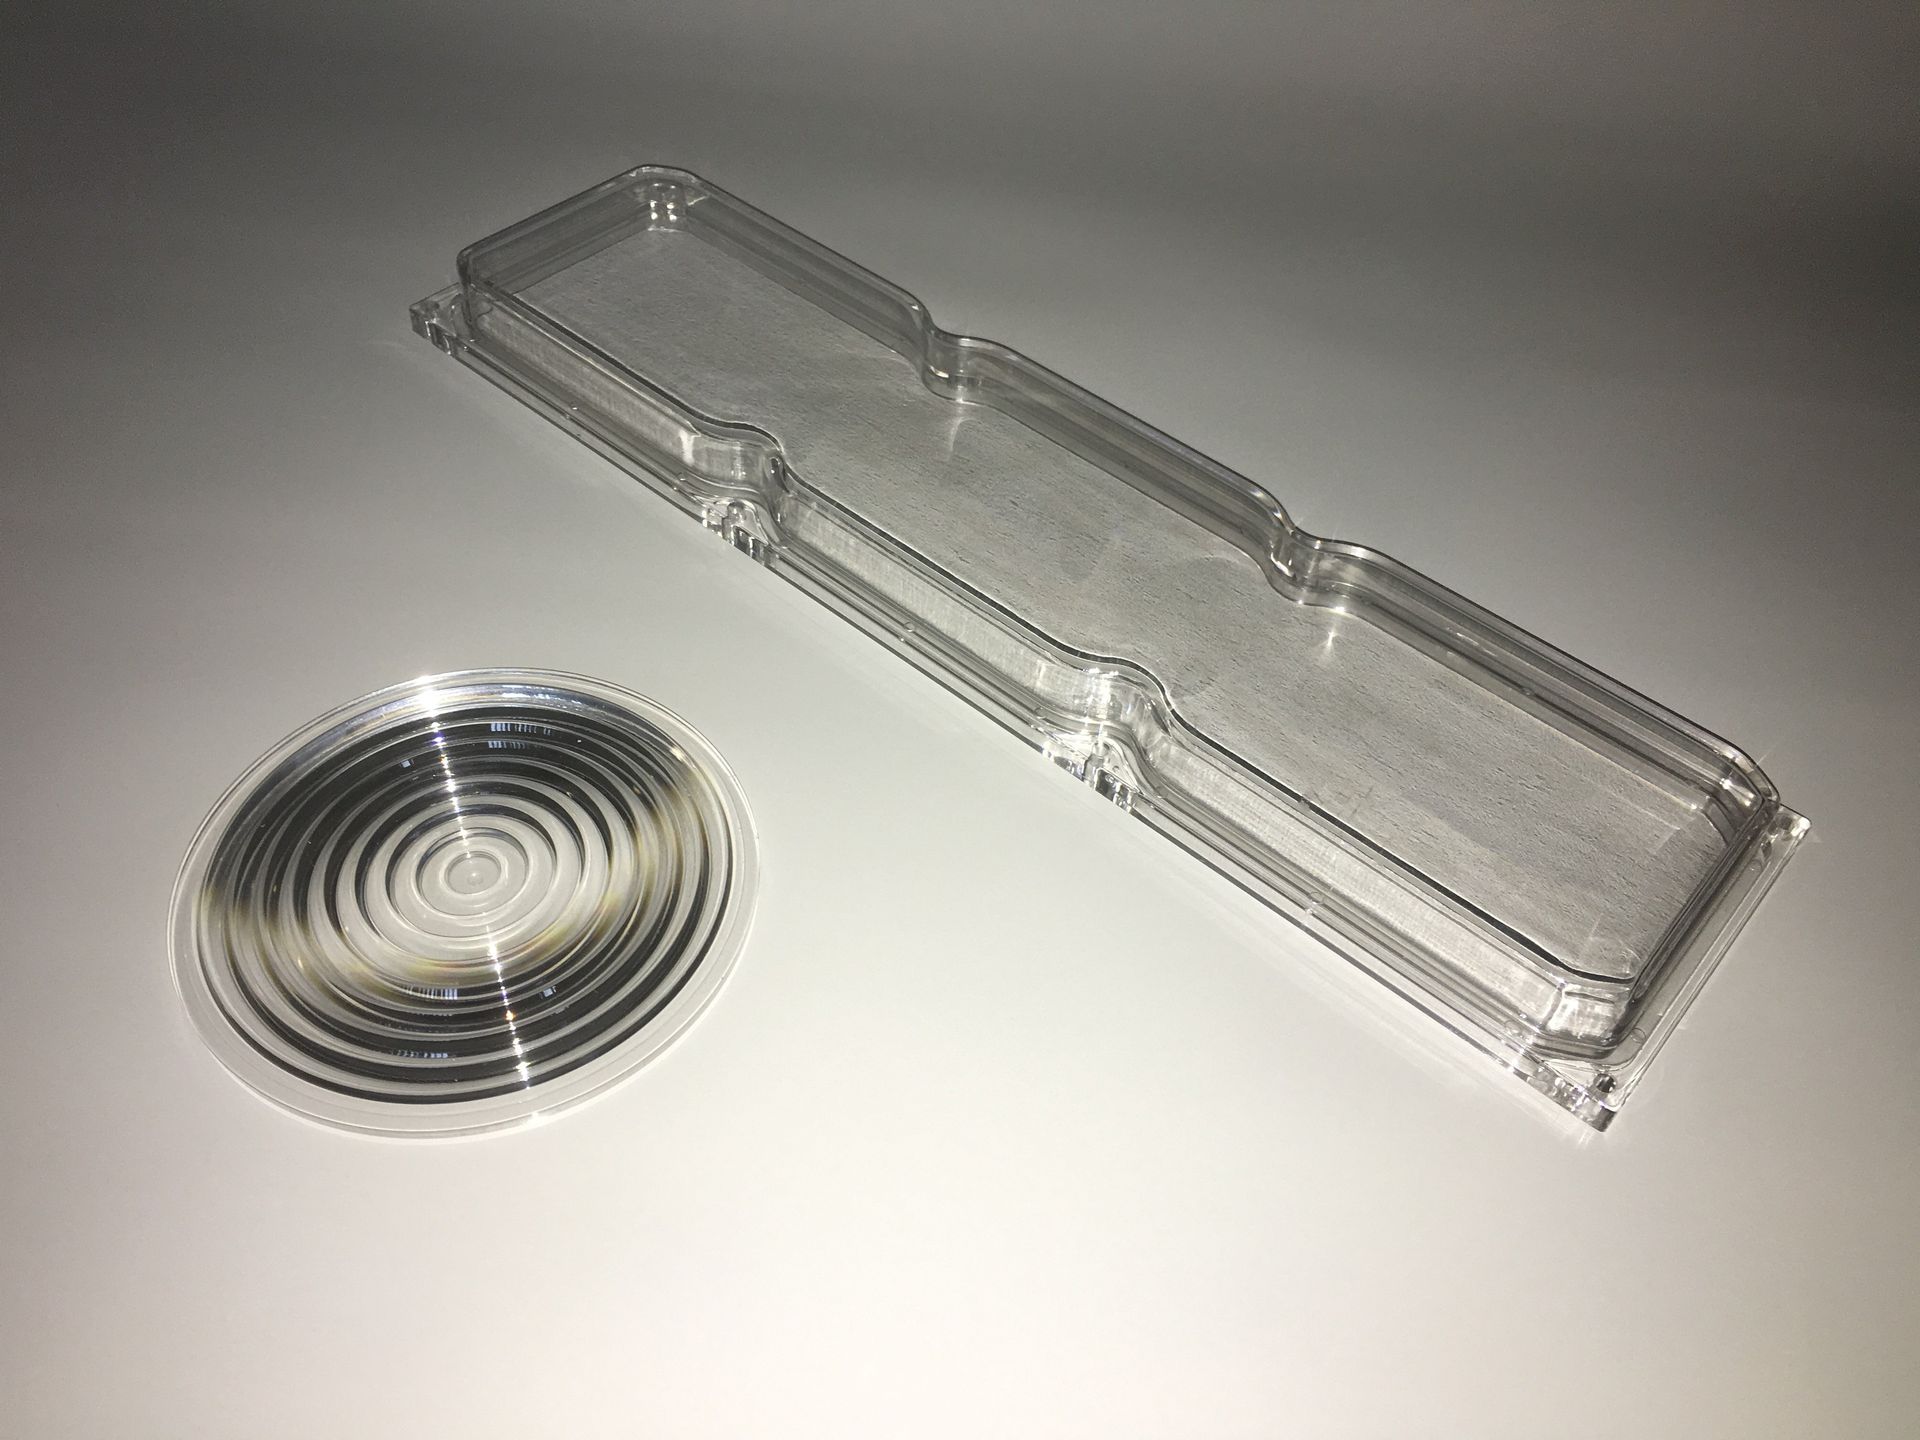 Two clear plastic objects are sitting on a white surface.